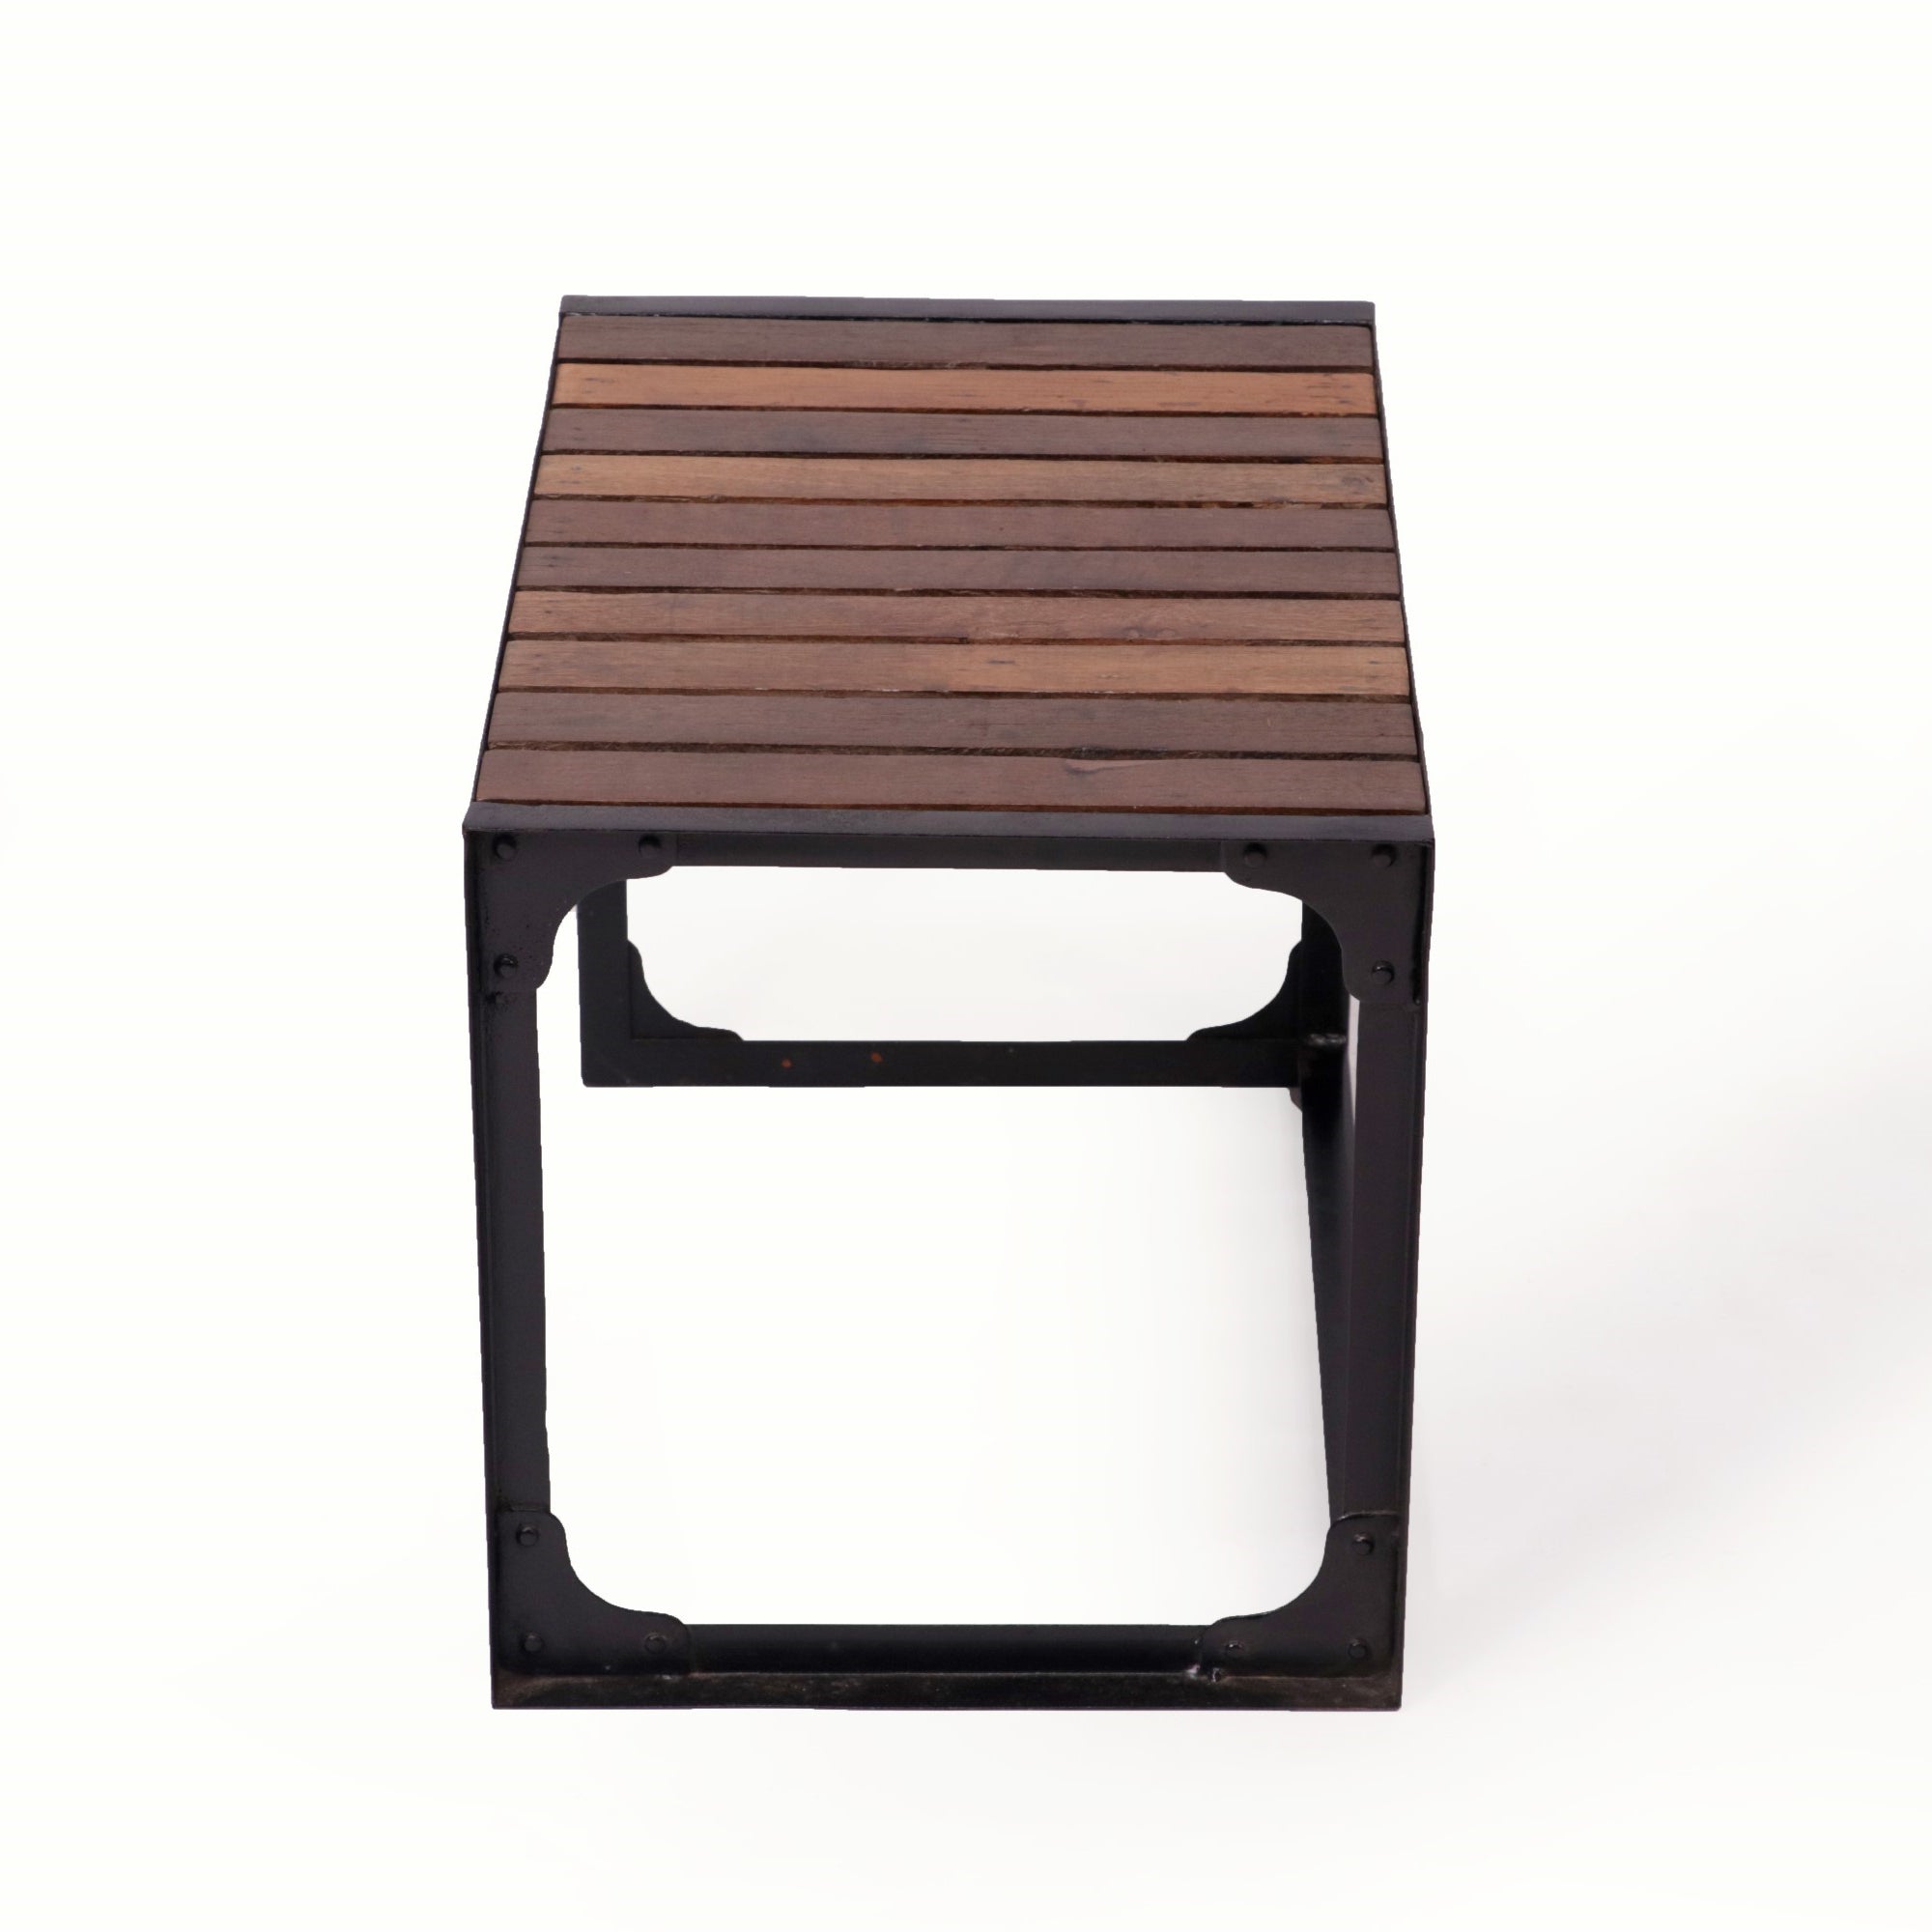 Wooden Metallic Frame Table Stand Stool